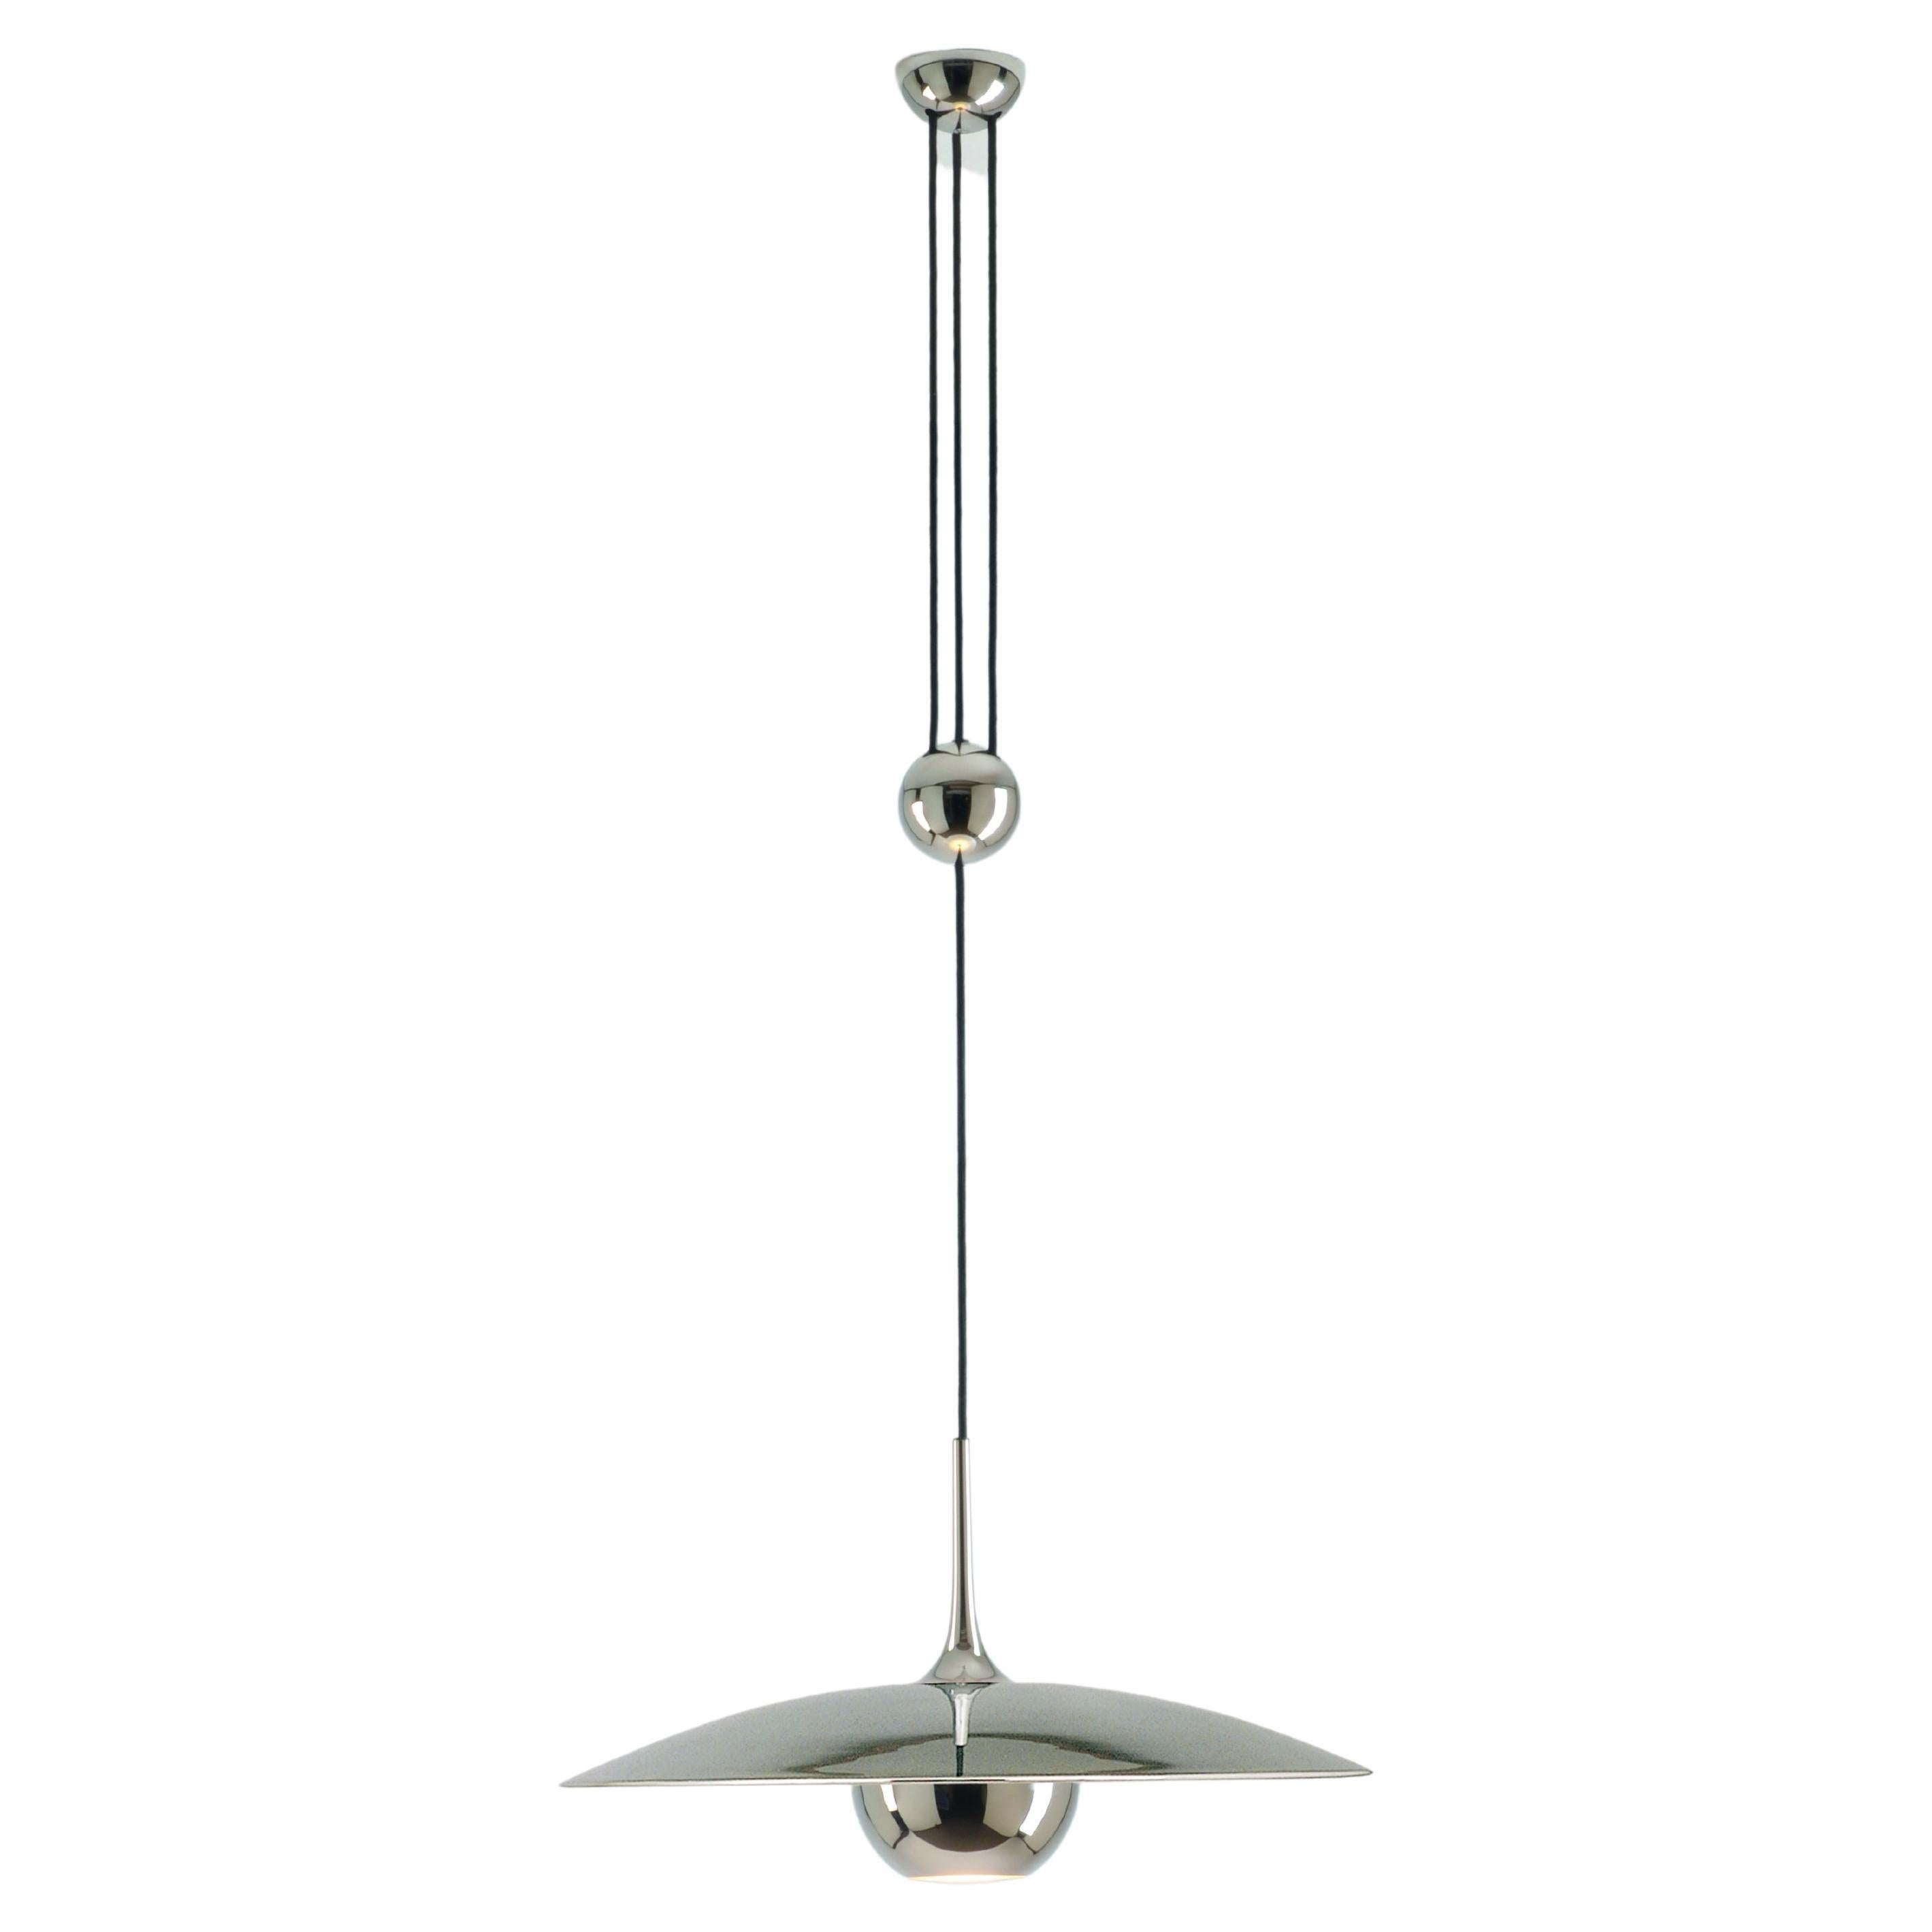 Florian Schulz Onos 55 Counterbalance Pendant Lamp in Polished Brass or nickel